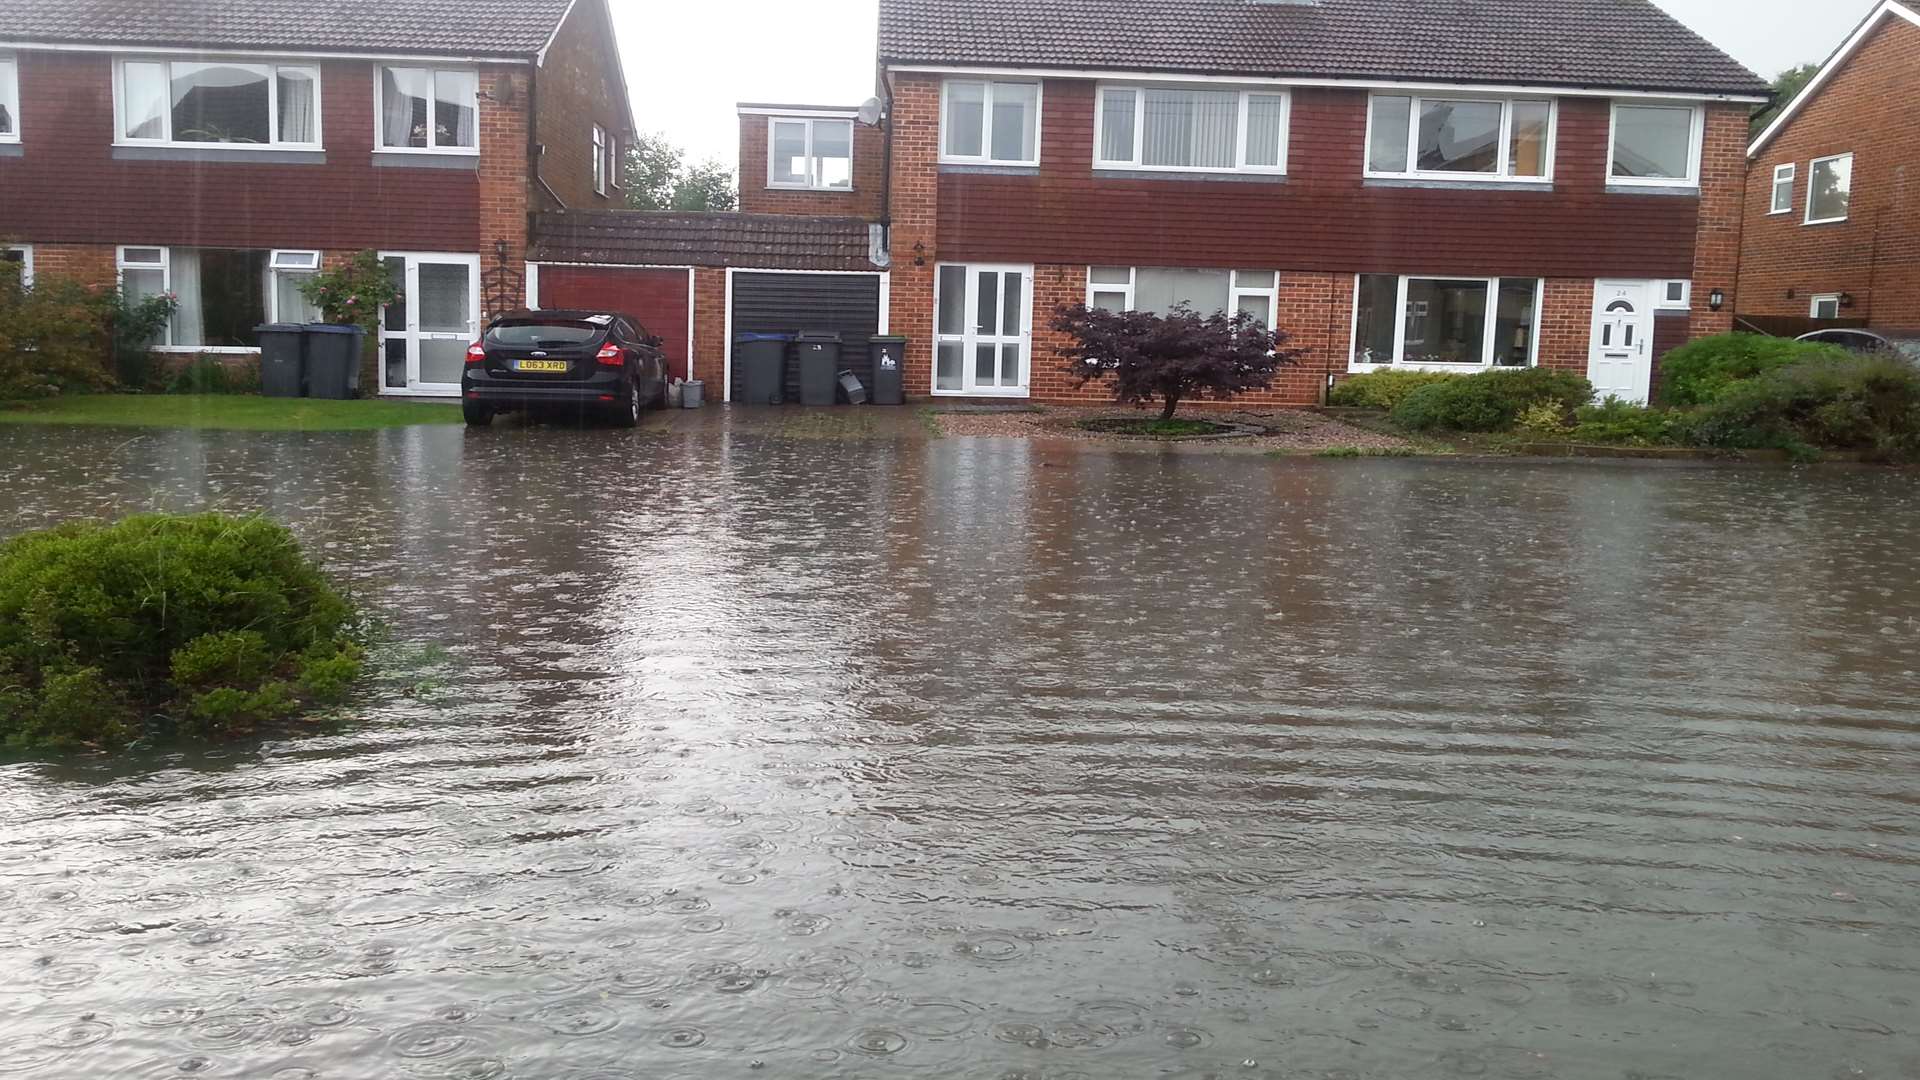 Flooding in Maple Close, Rough Common